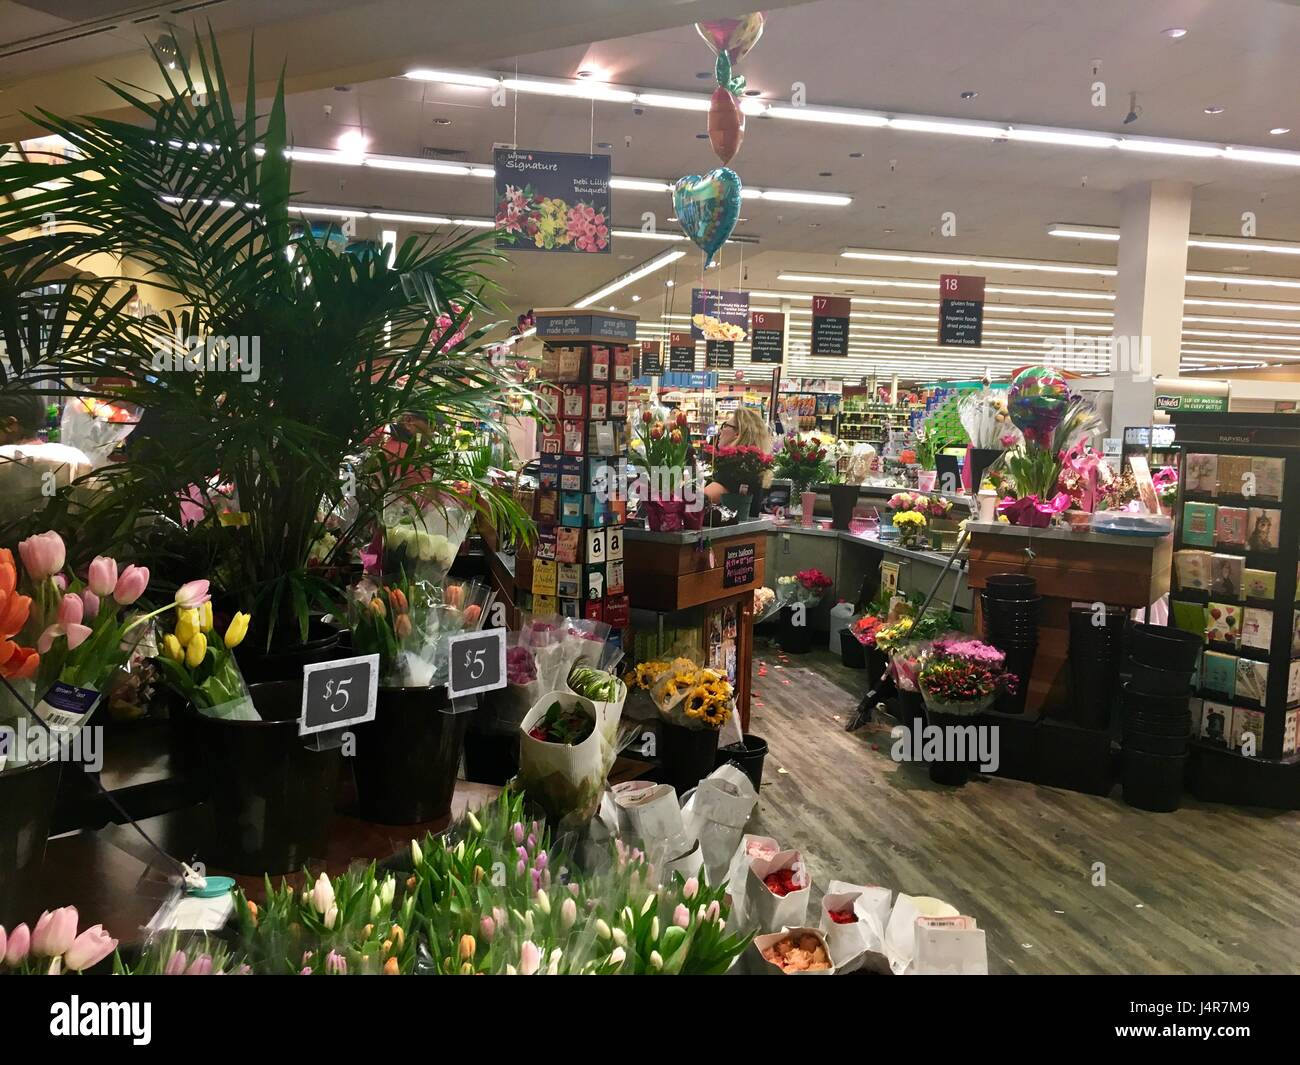 Maryland, USA - May 13, 2017: People buying floral arrangements, flowers, and plants at Safeway the night before mothers day to beat the last minute rush the day of mothers day. Photo credit: Jeramey Lende/Alamy Live News Stock Photo